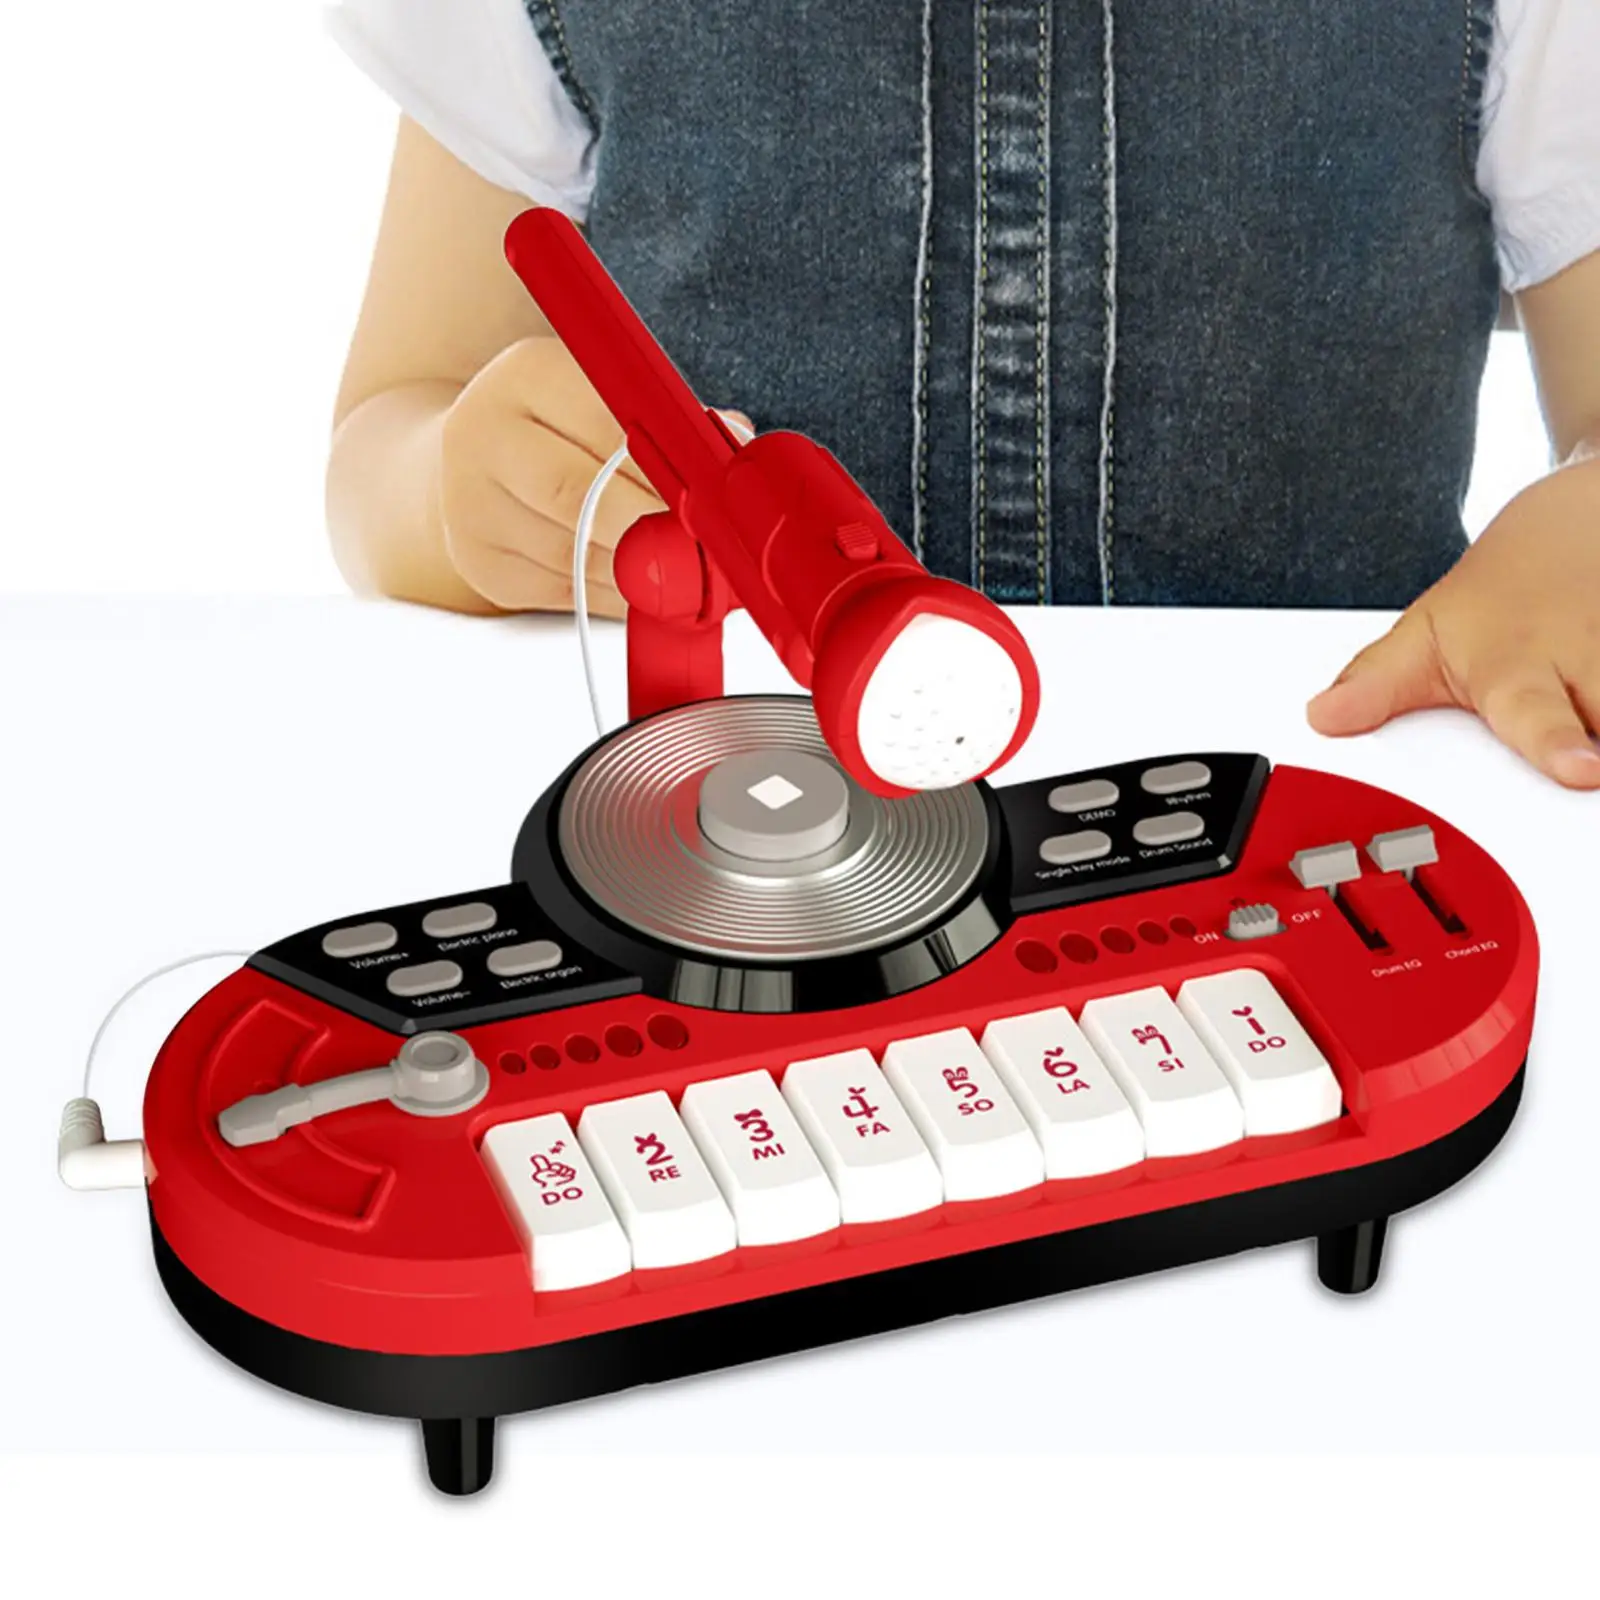 DJ Party Mixer Toy Sound Effects DJ Party Mixer Turntable Toy for 1+ Year Old Gift